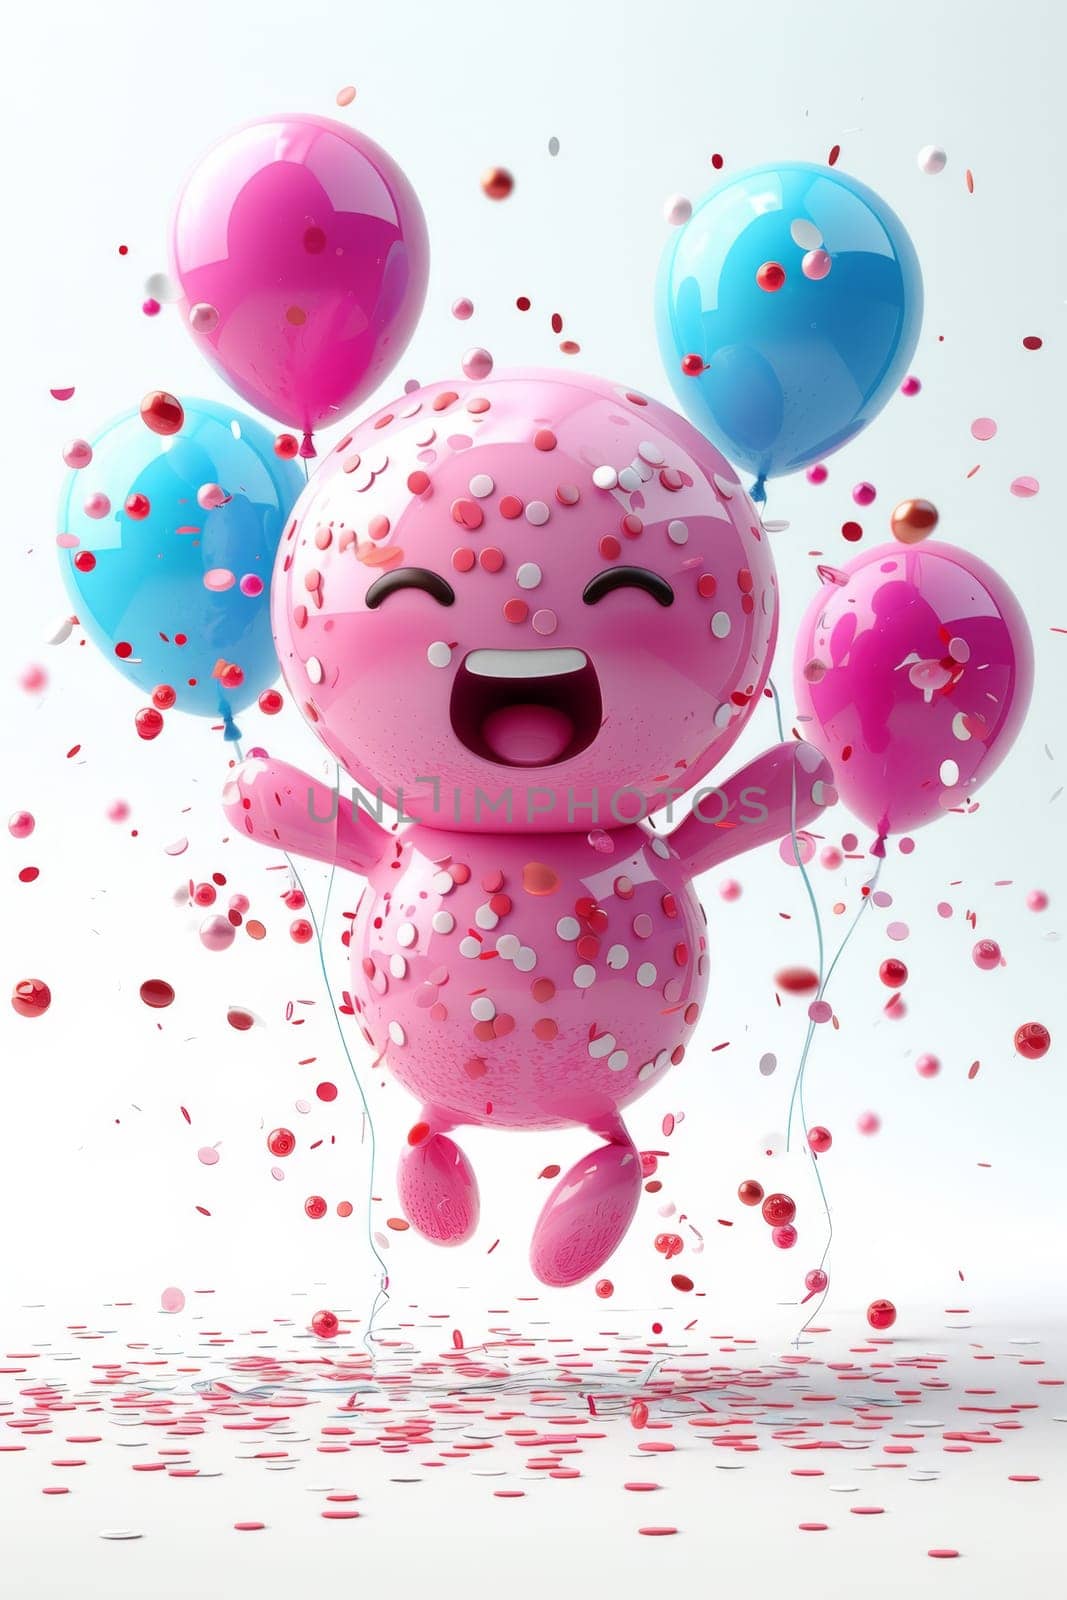 A cheerful cartoon pink character is having fun on the background of festive balloons. The concept of the holiday. 3d illustration by Lobachad